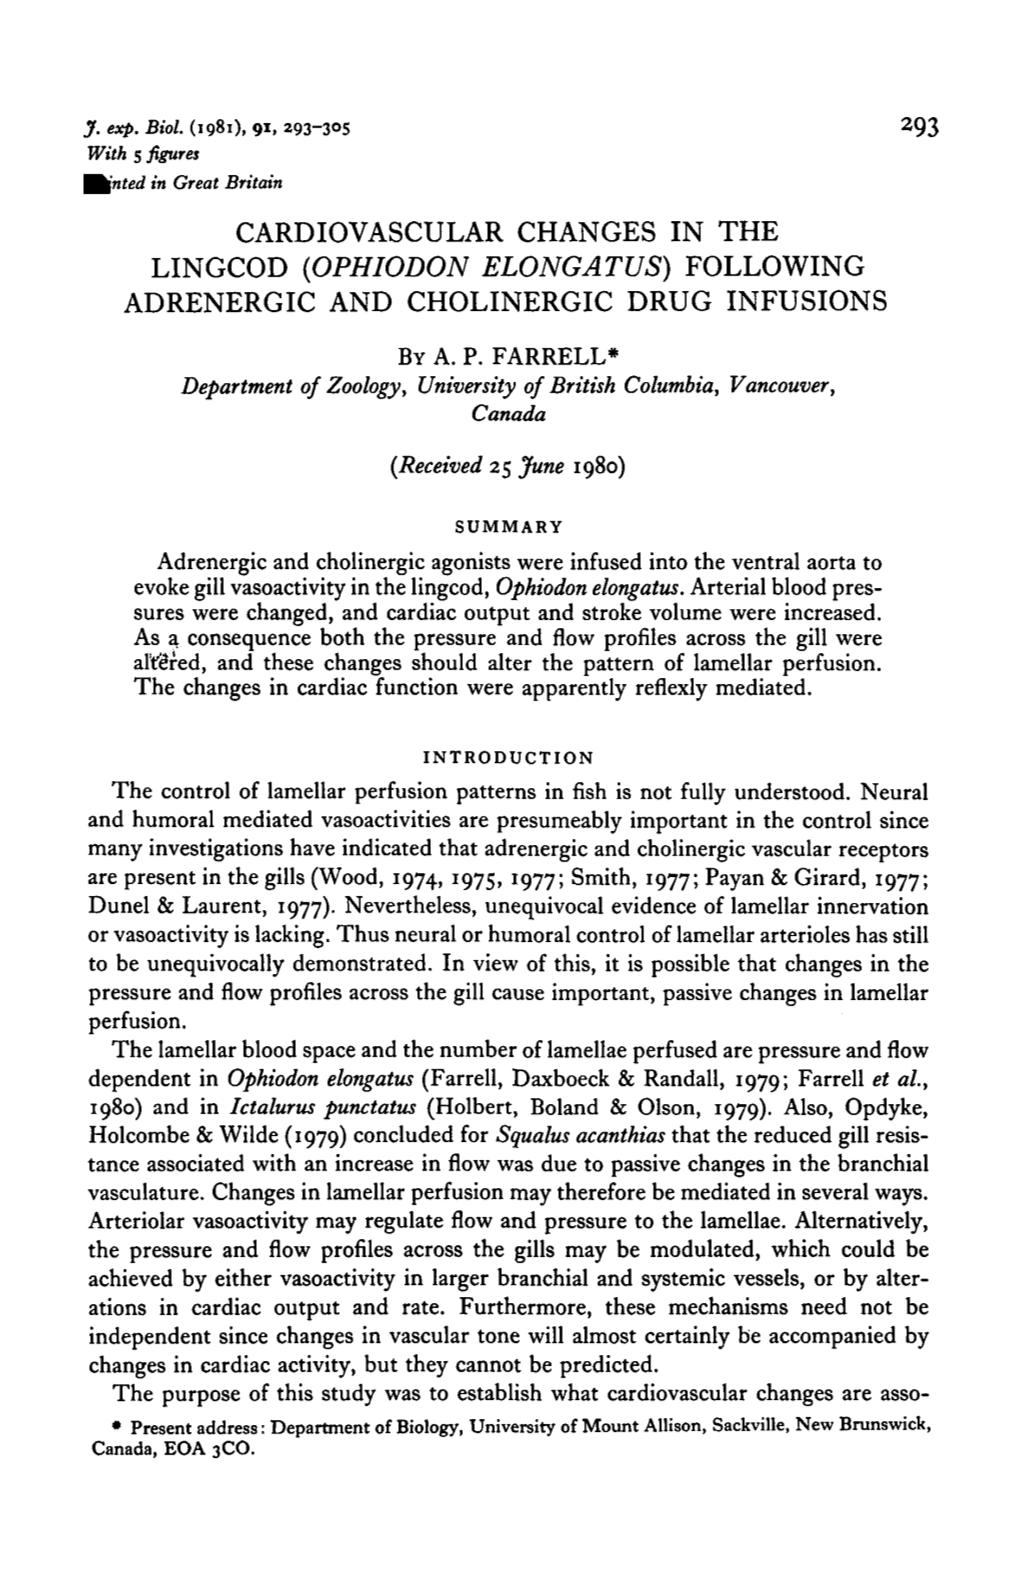 Cardiovascular Changes in the Lingcod (Ophiodon Elongatus) Following Adrenergic and Cholinergic Drug Infusions